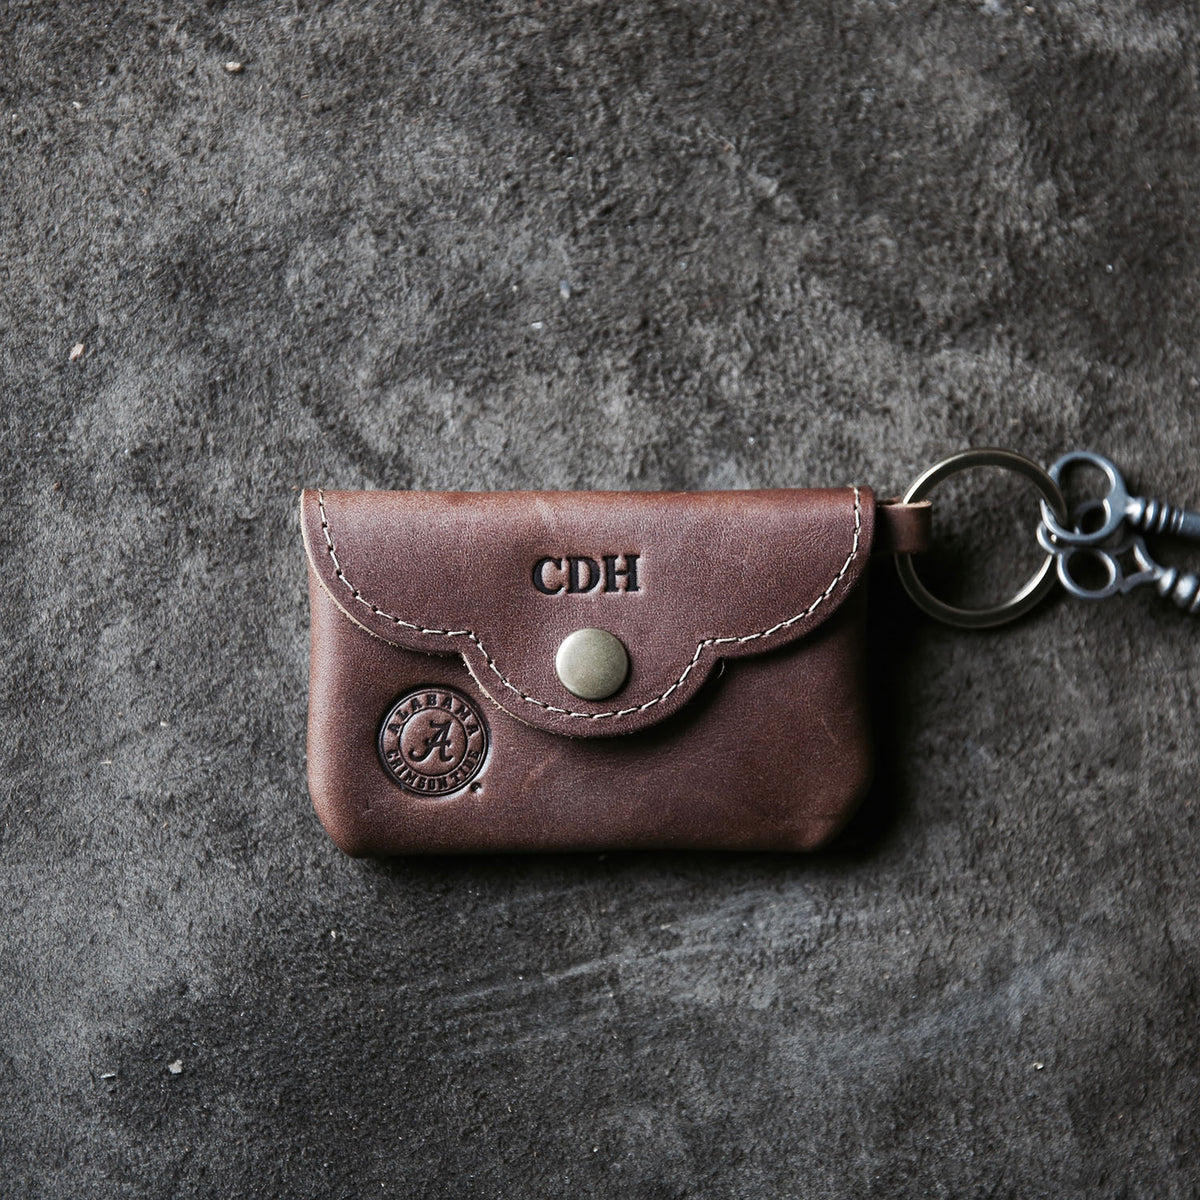 Fine leather scallop keychain wallet with personalized initials and Alabama Crimson Tide logo